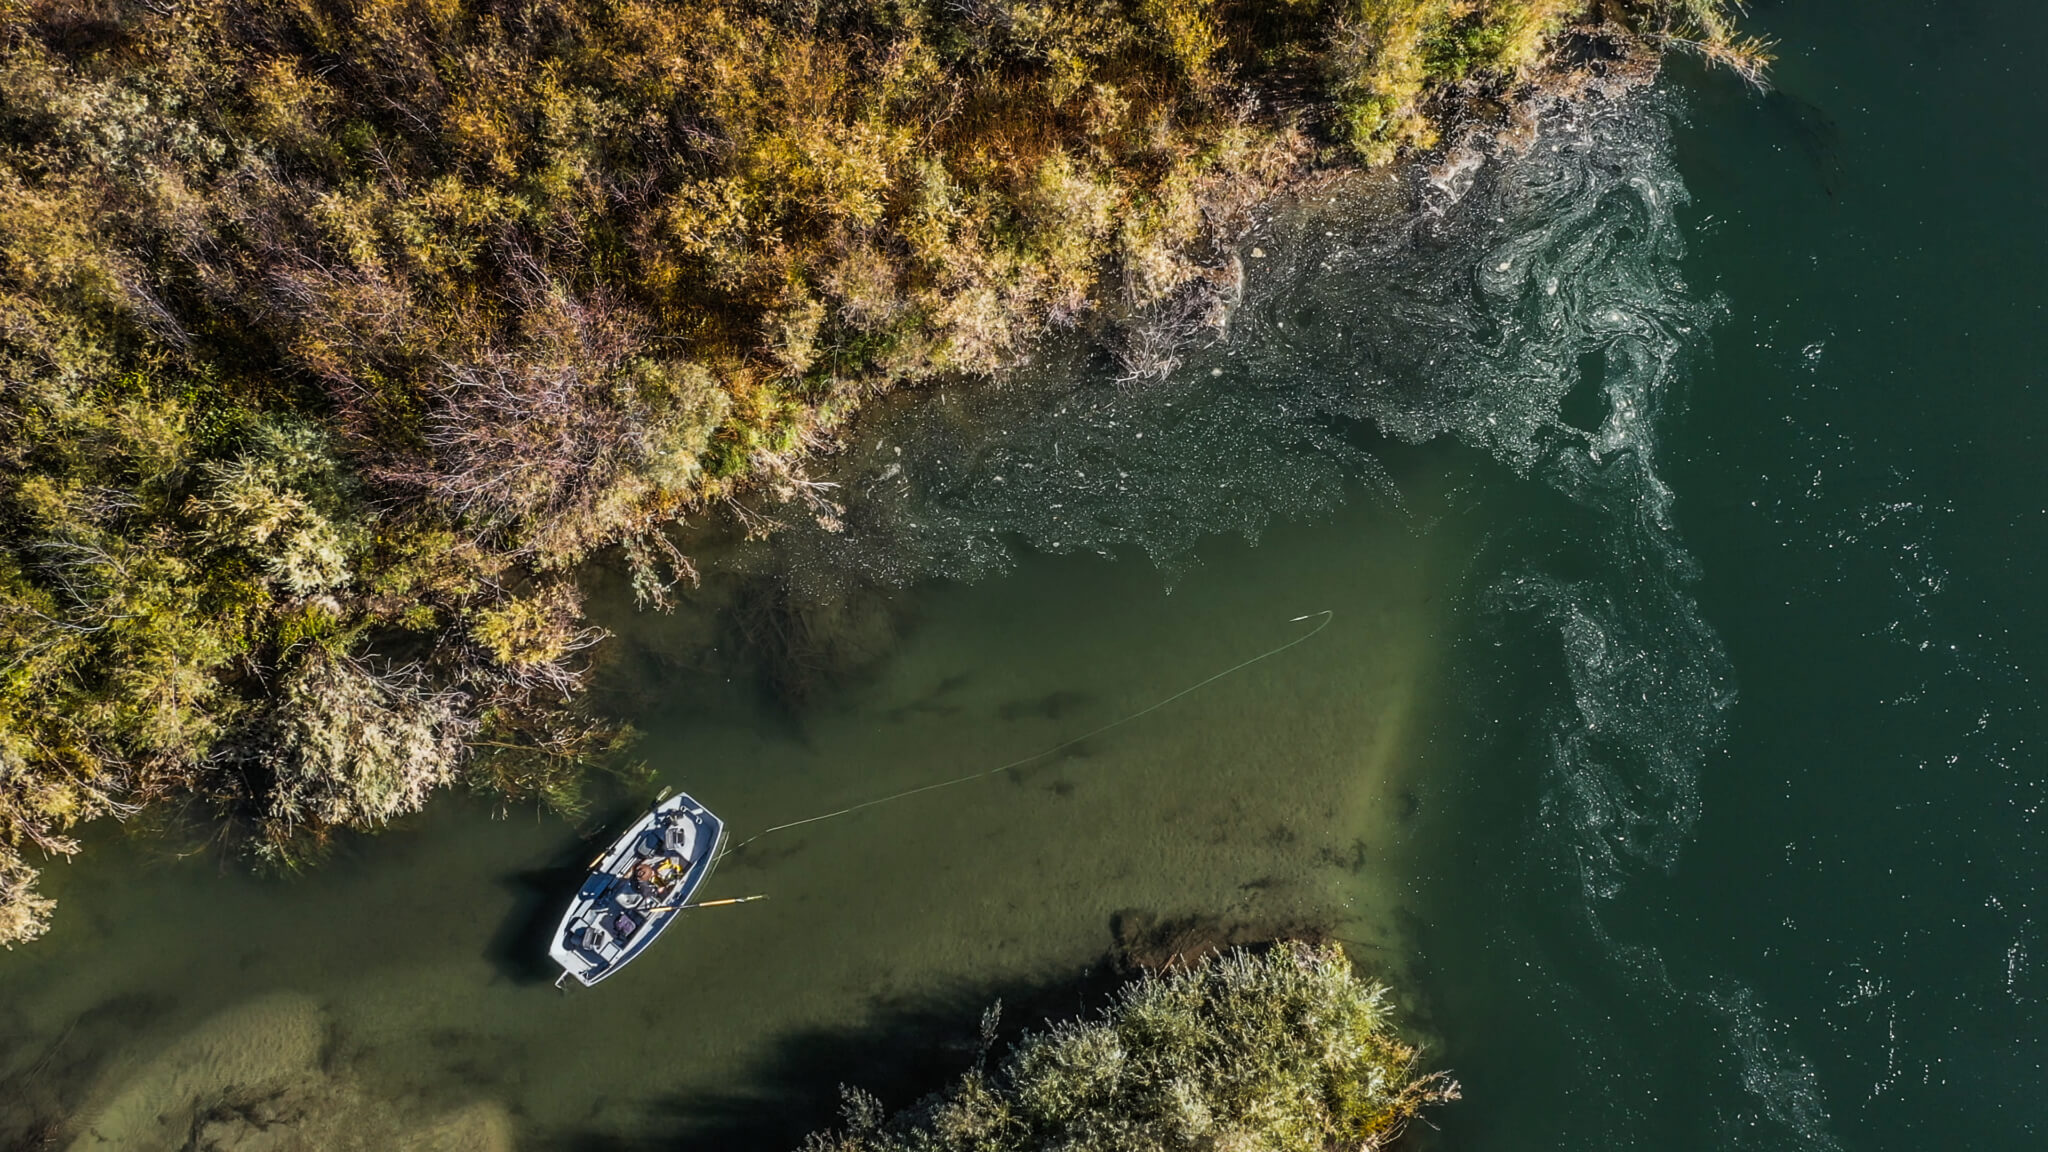 Top down view of boat in river.